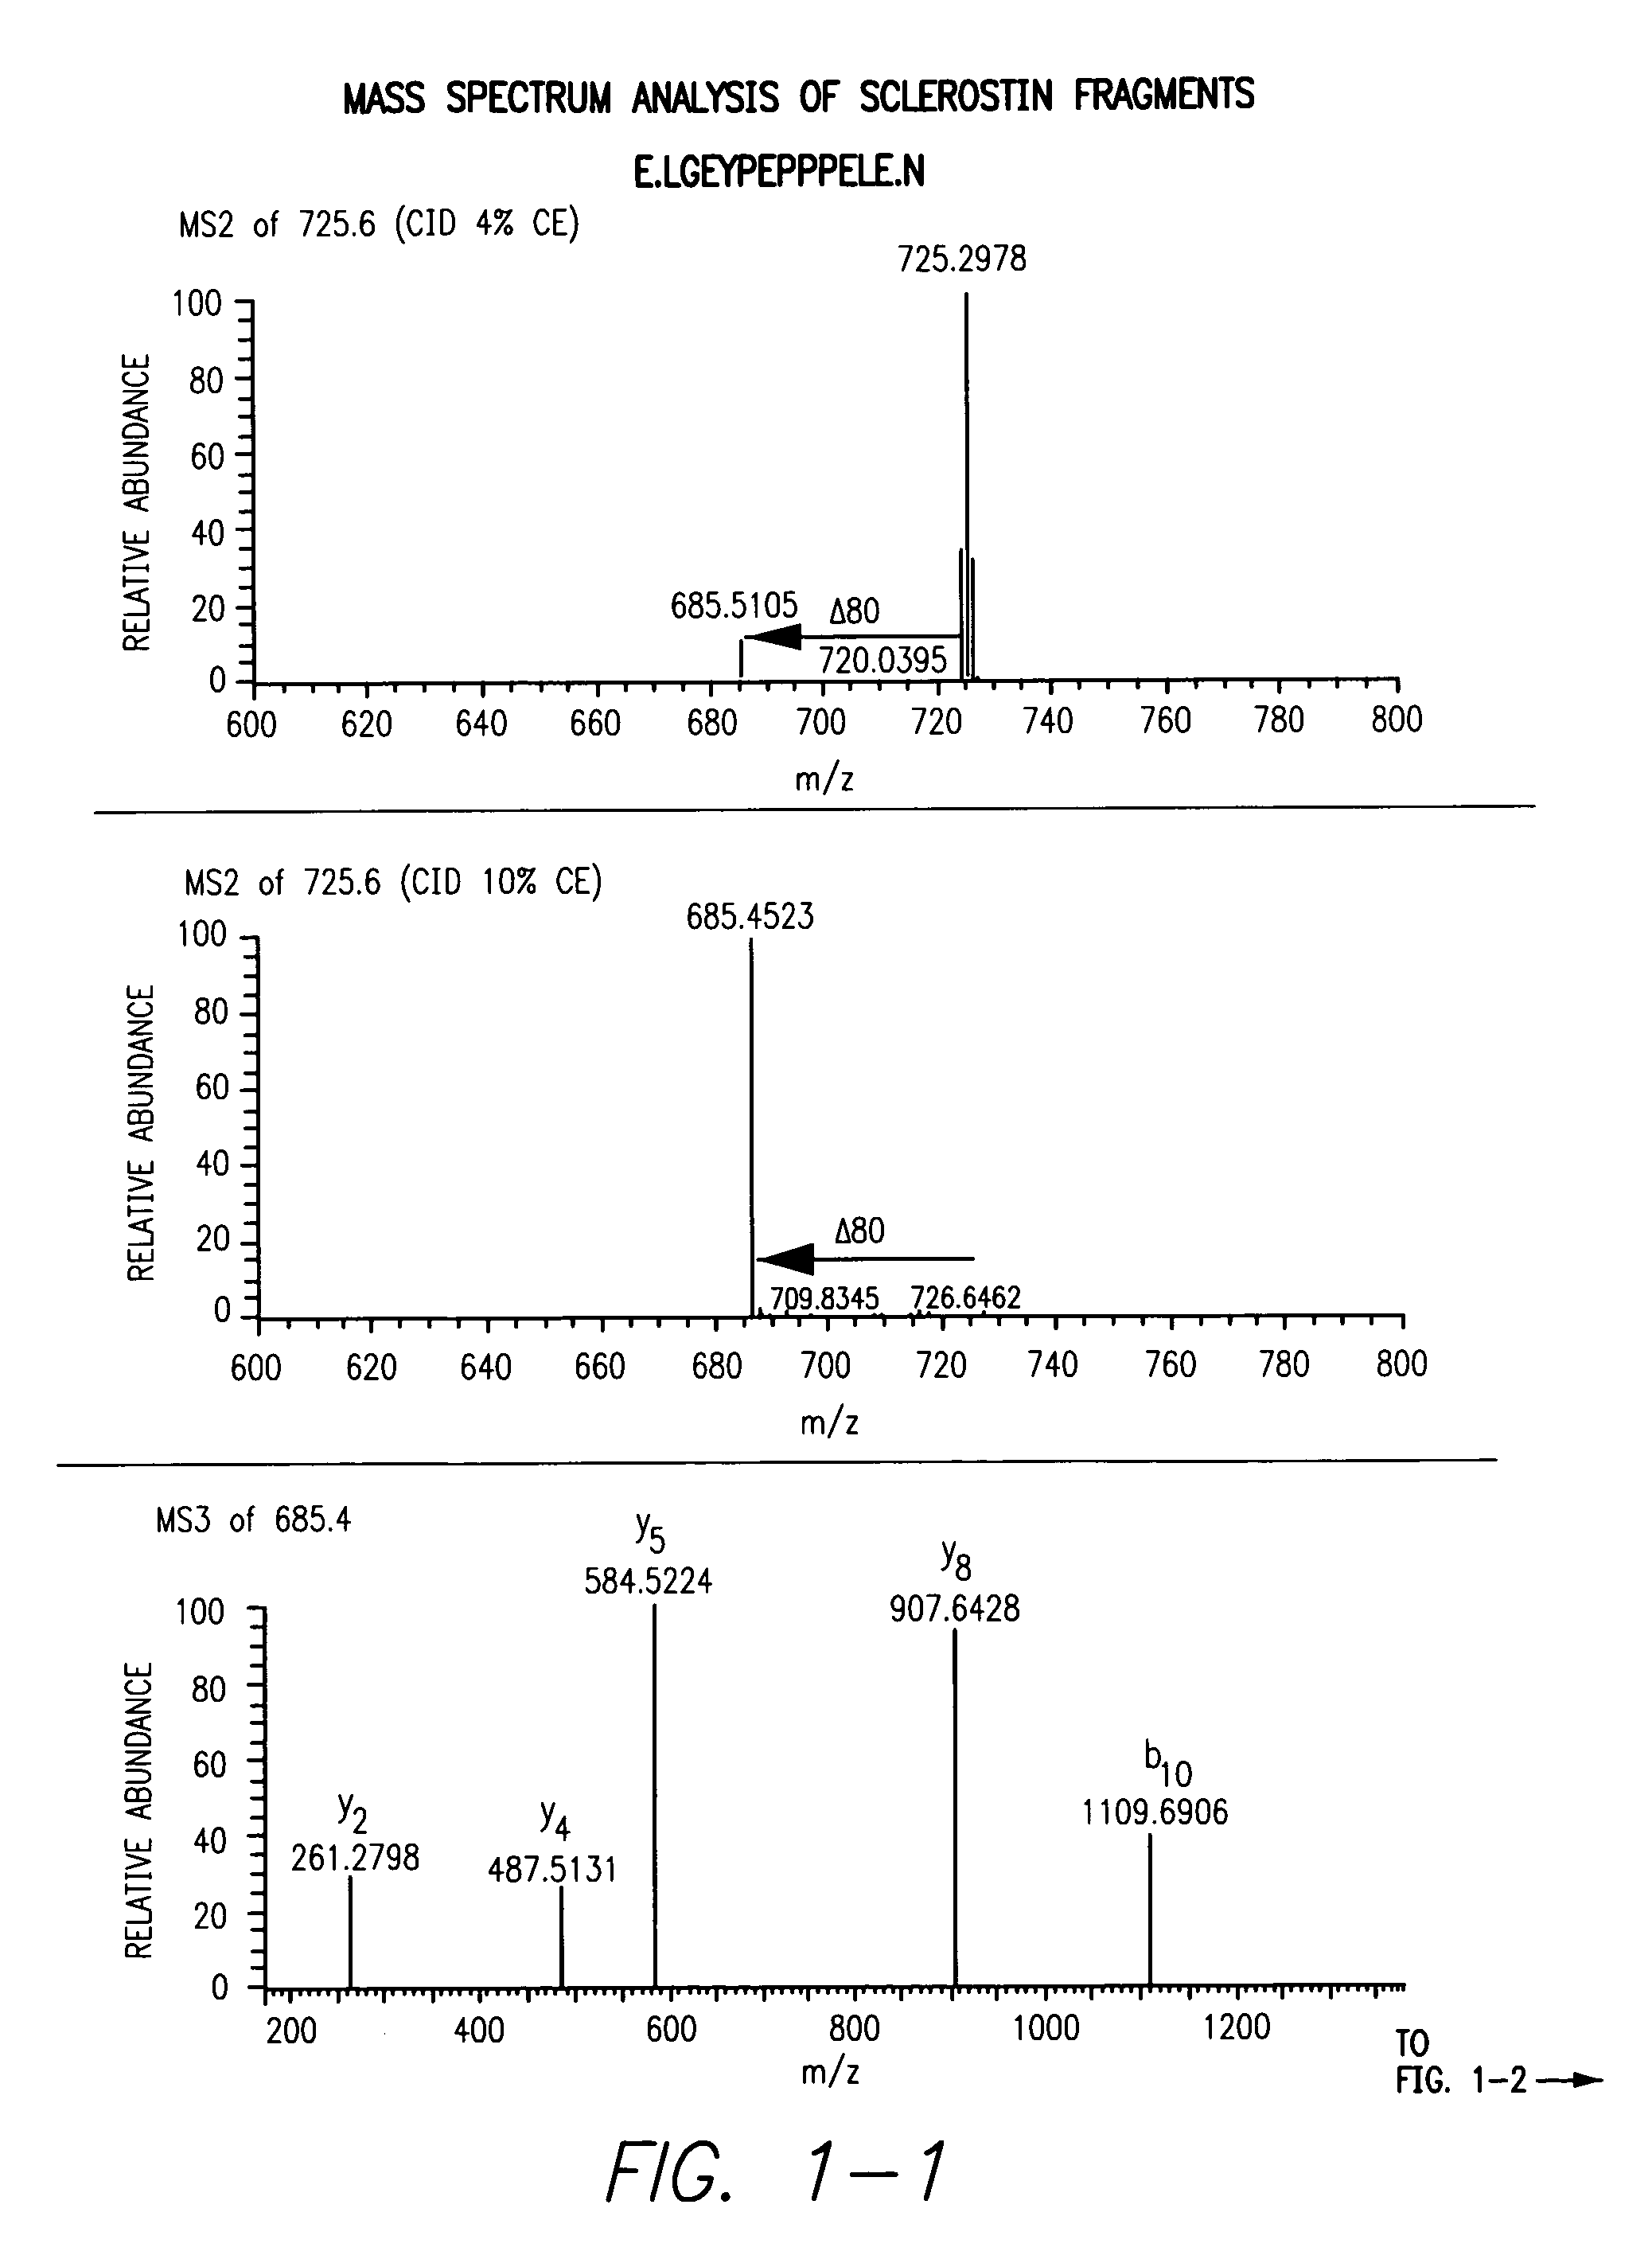 Sulfonated Sclerostin, antibodies, epitopes and methods for identification and use therefor